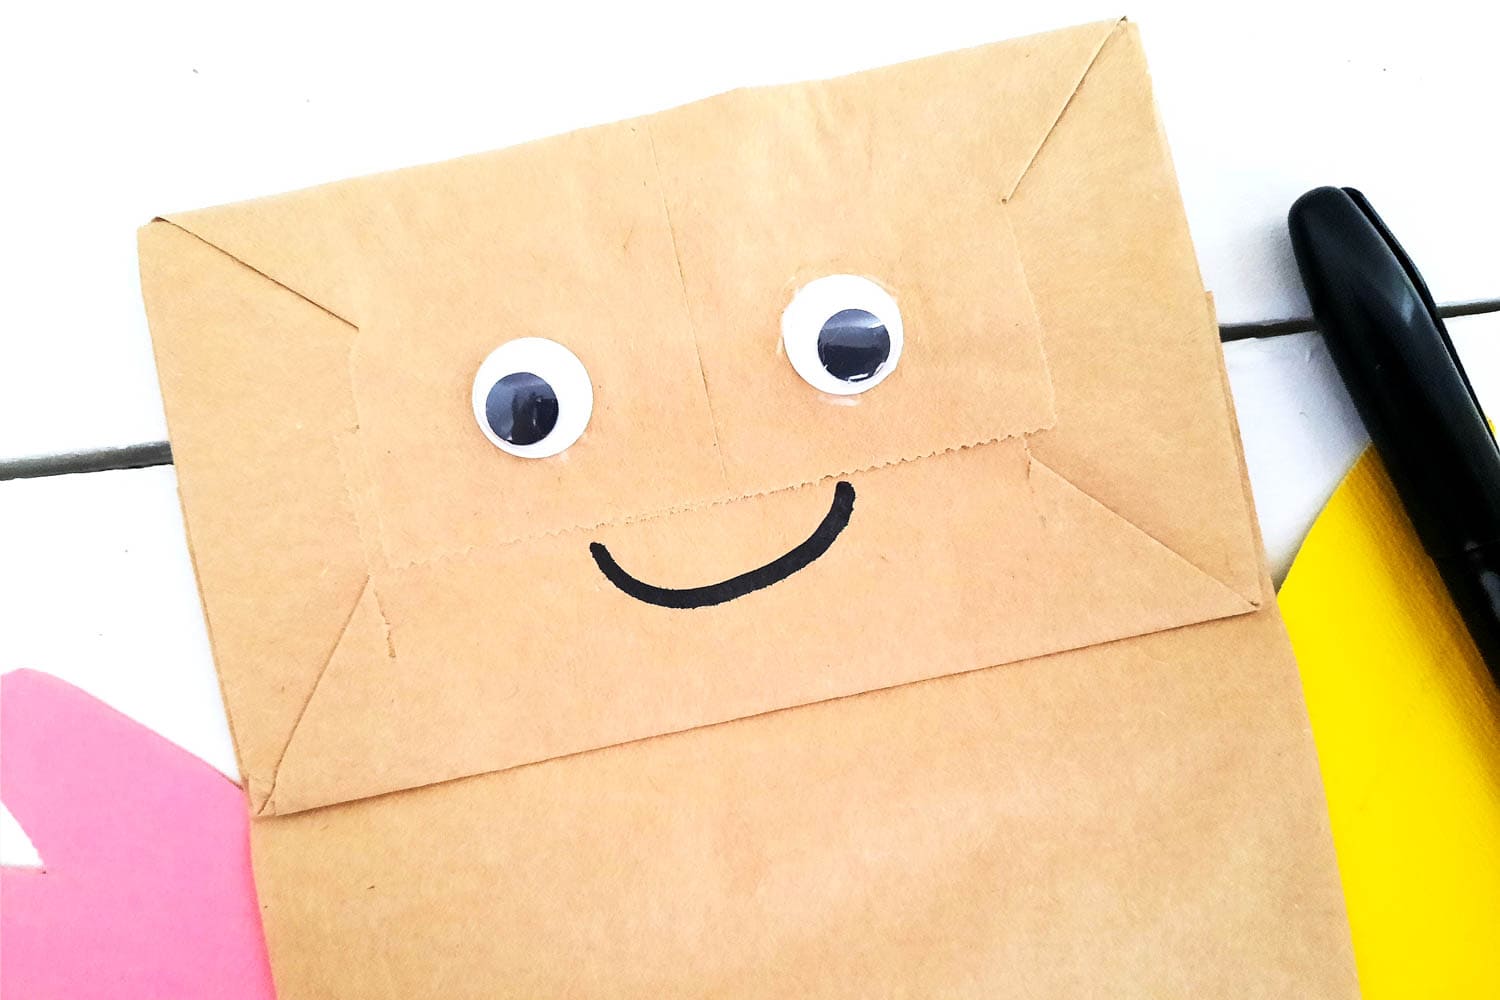 Add Googly Eyes and a Smiley Face to the Paper Bag